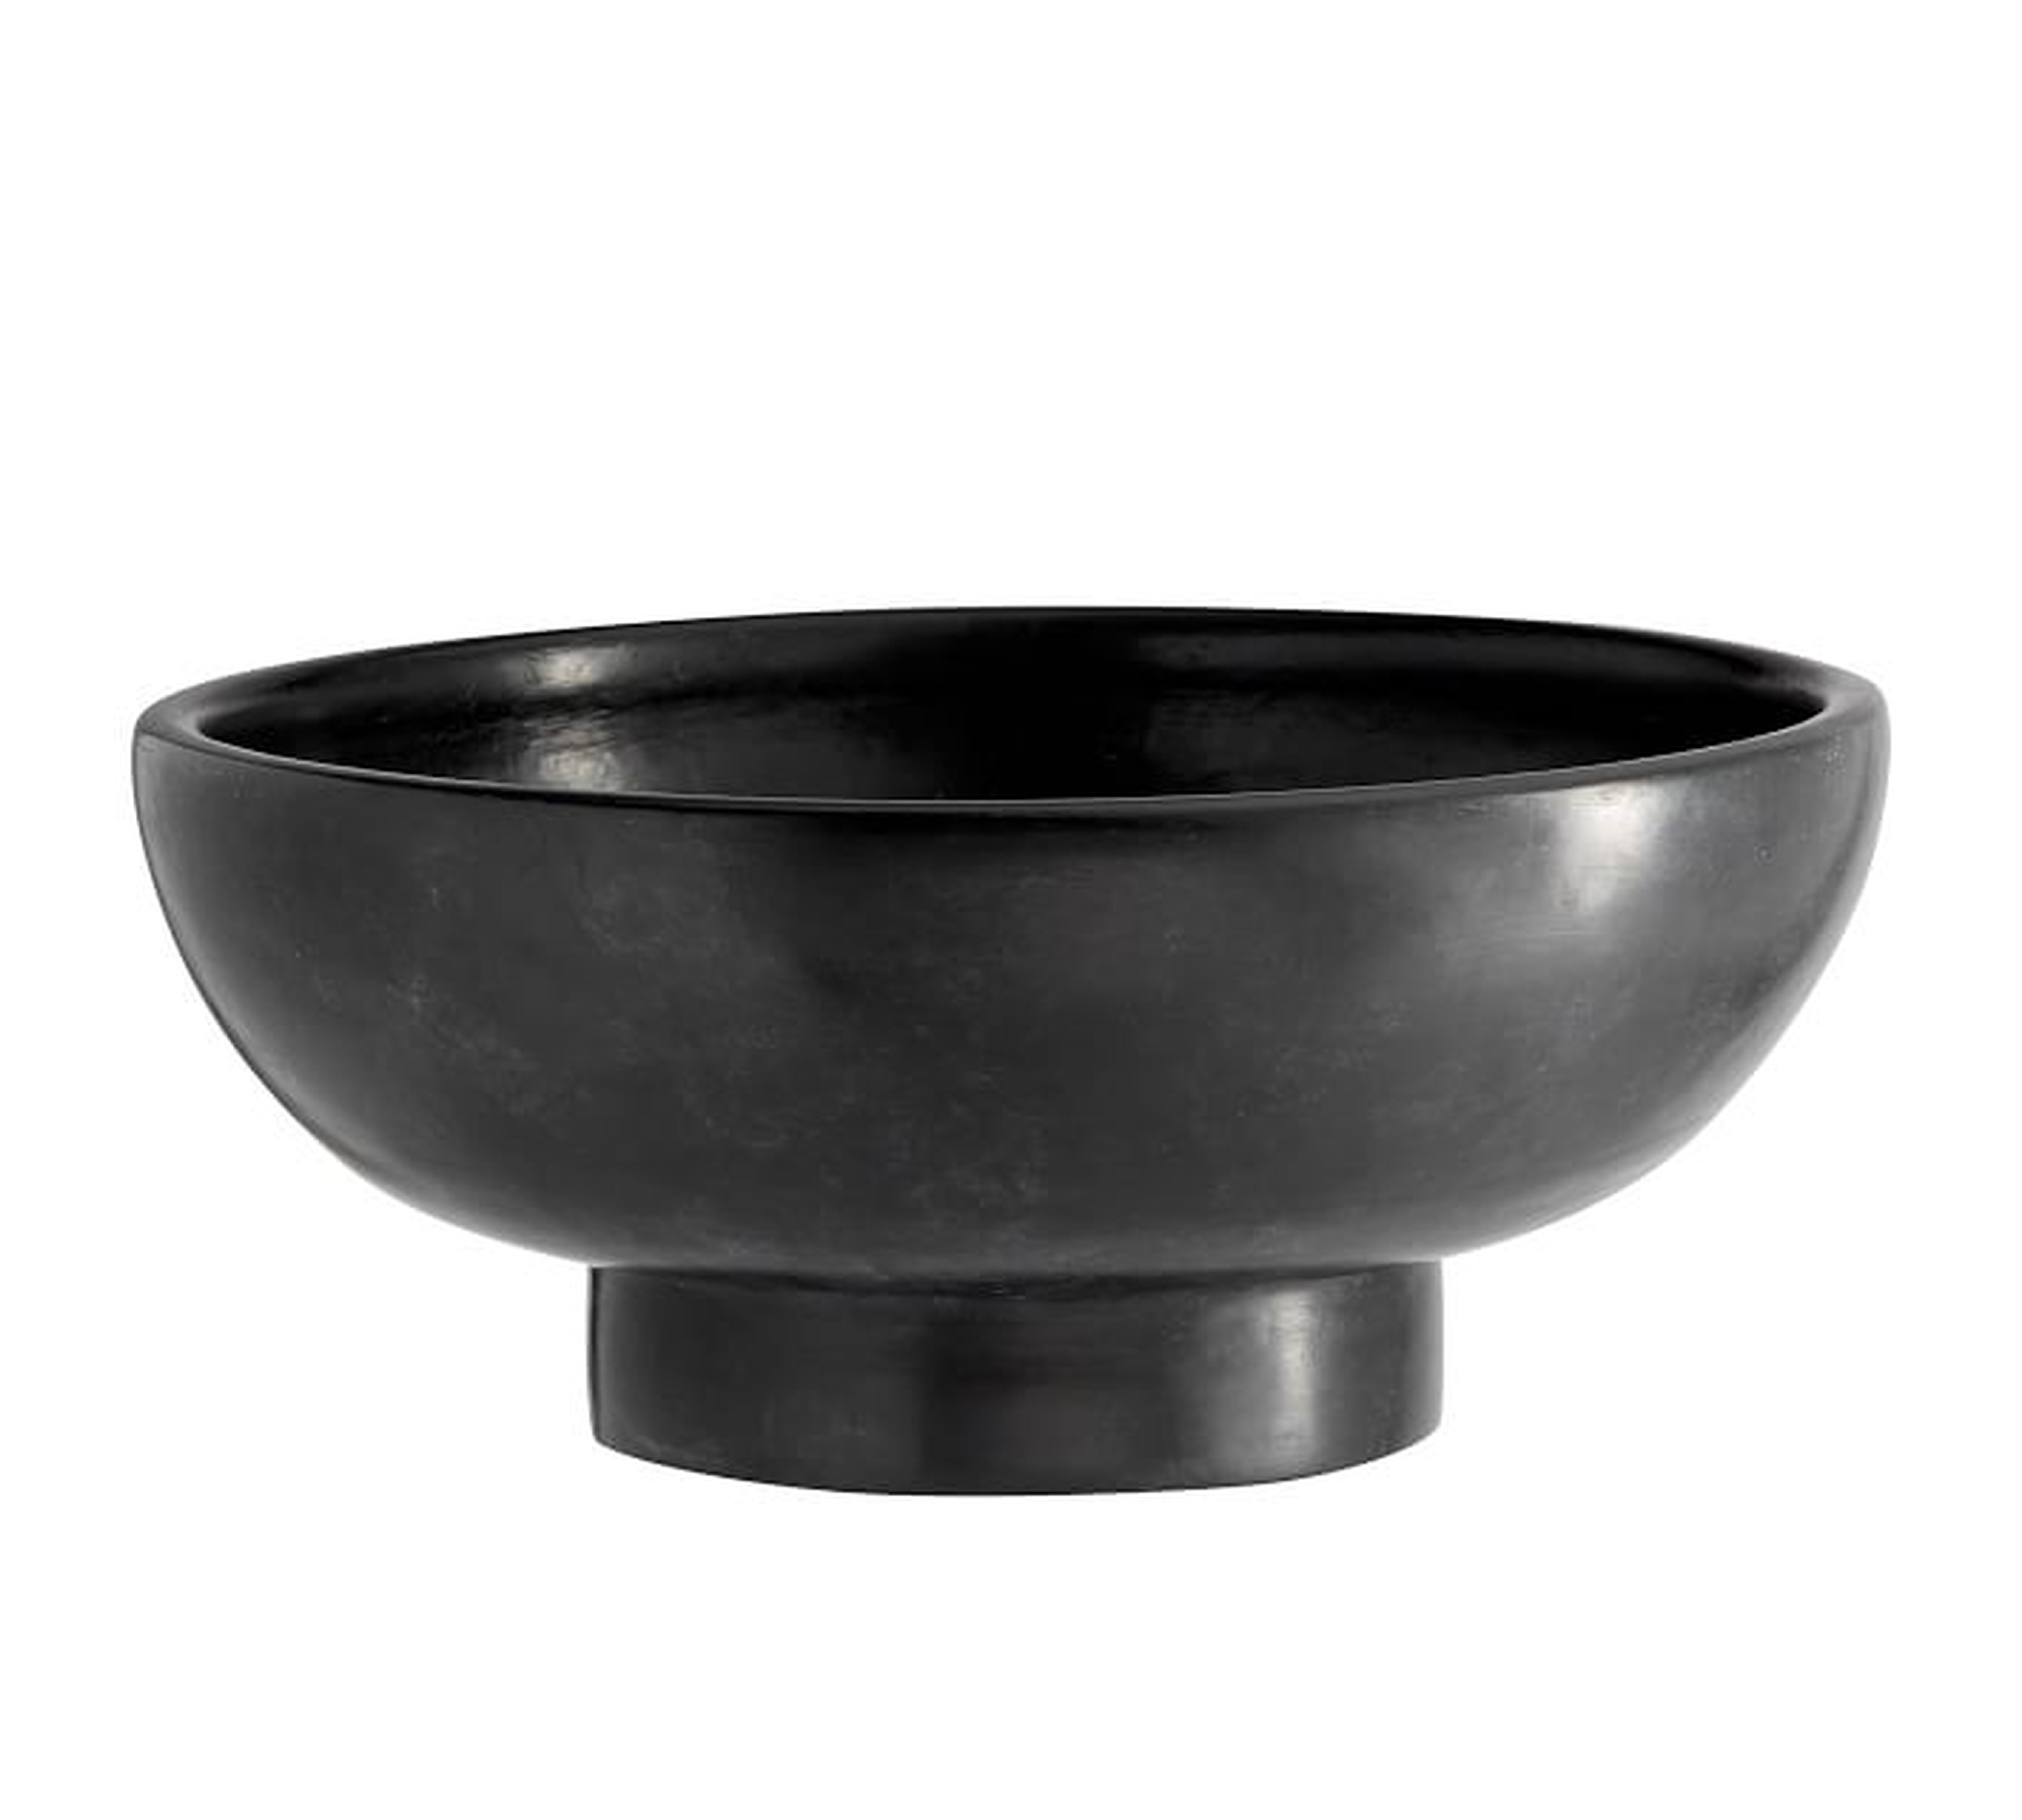 Orion Handcrafted Terracotta Bowl, Small, Black - Pottery Barn